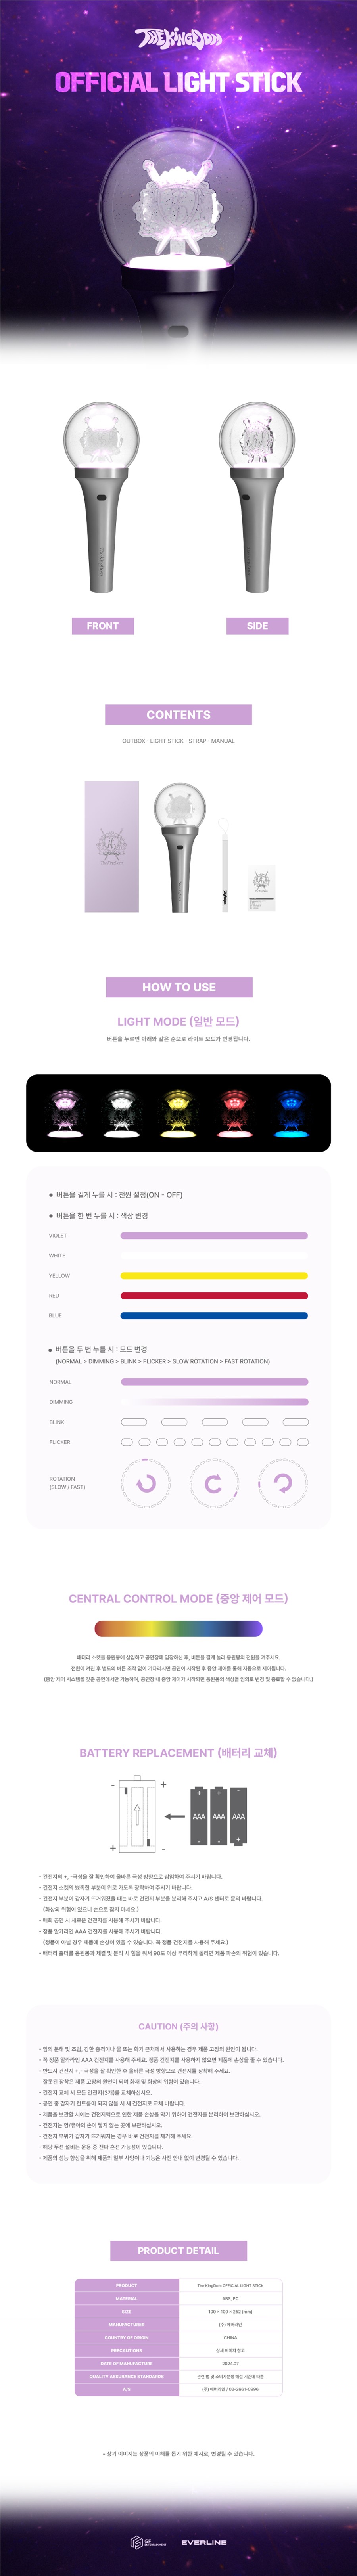 the-kingdom-official-light-stick-wholesales